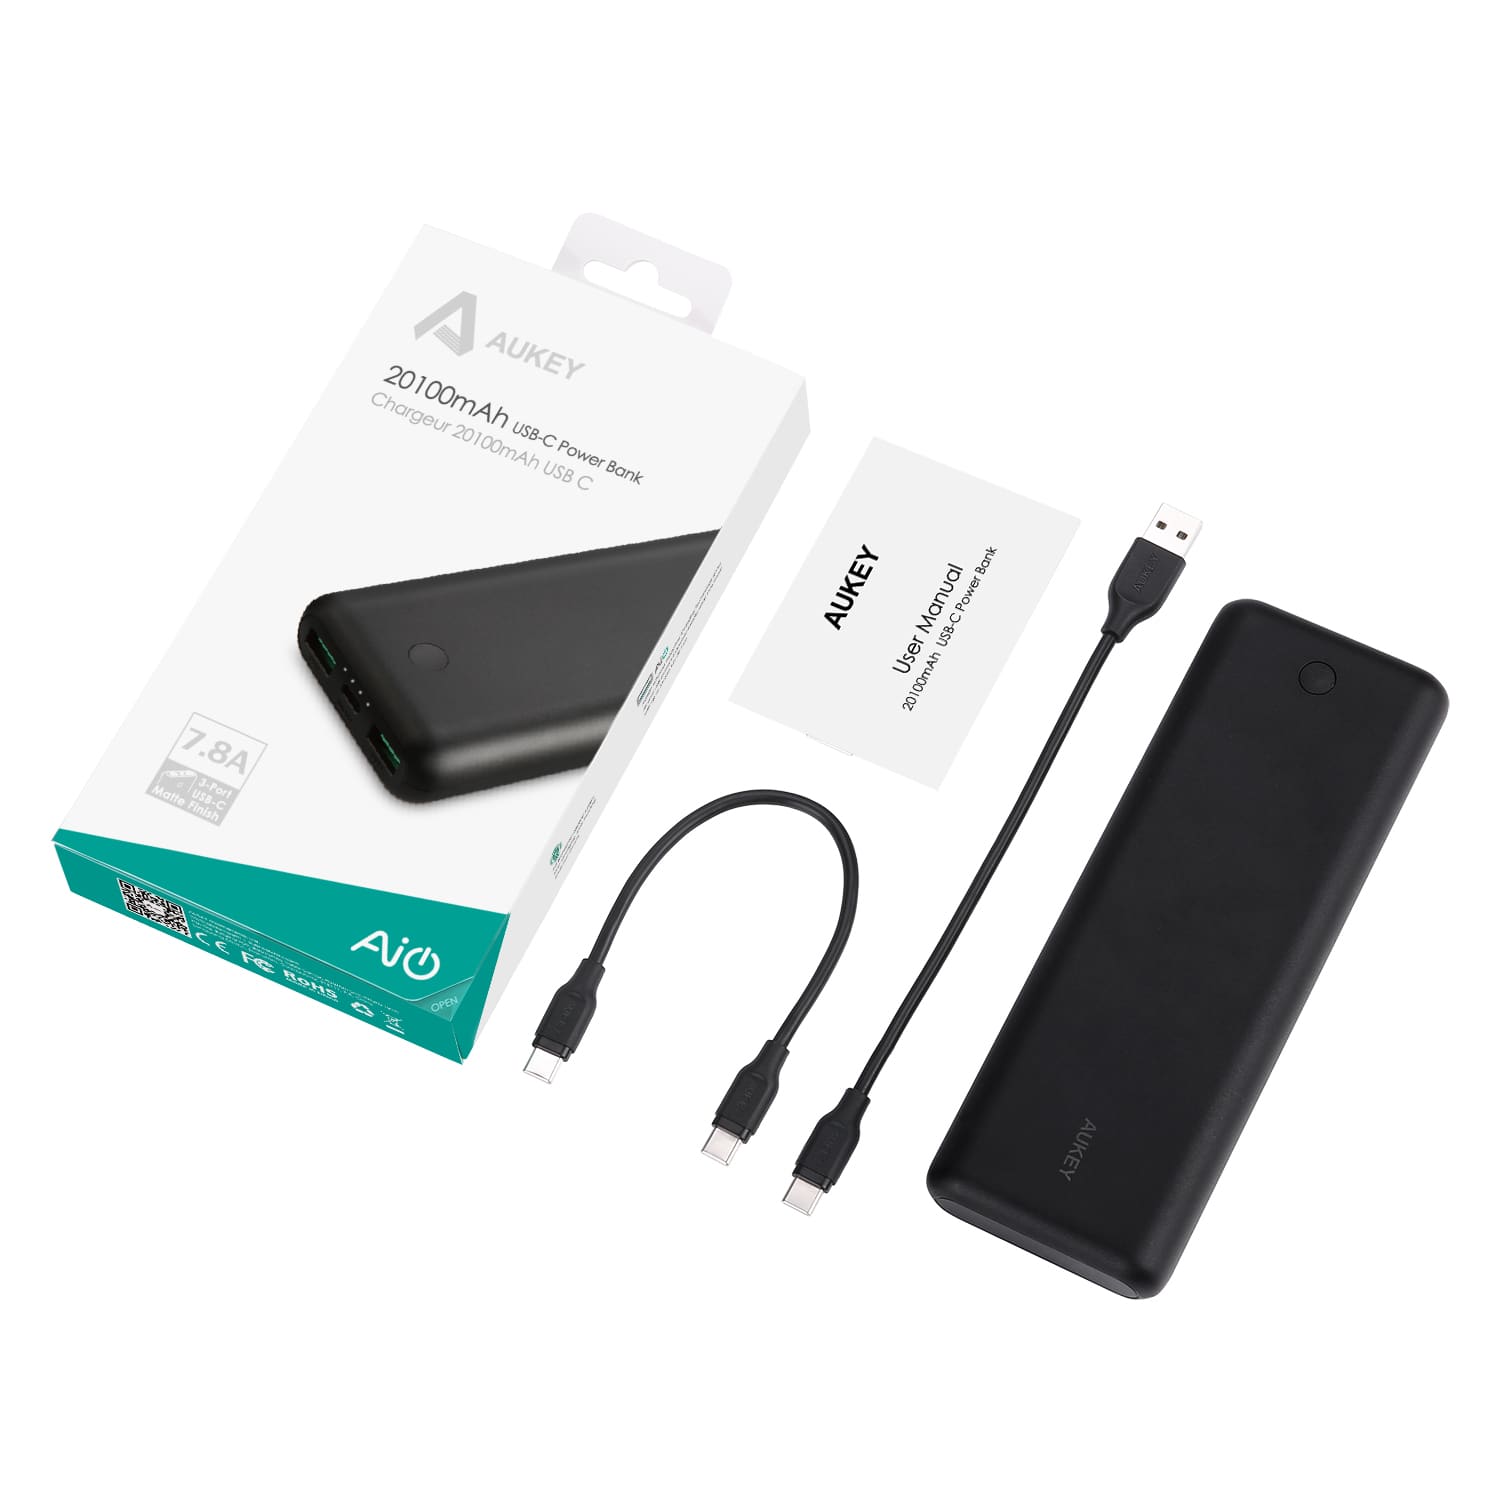 AUKEY PB-BY20 20100mAh Power Force Series USB C Power Bank - Aukey Malaysia Official Store